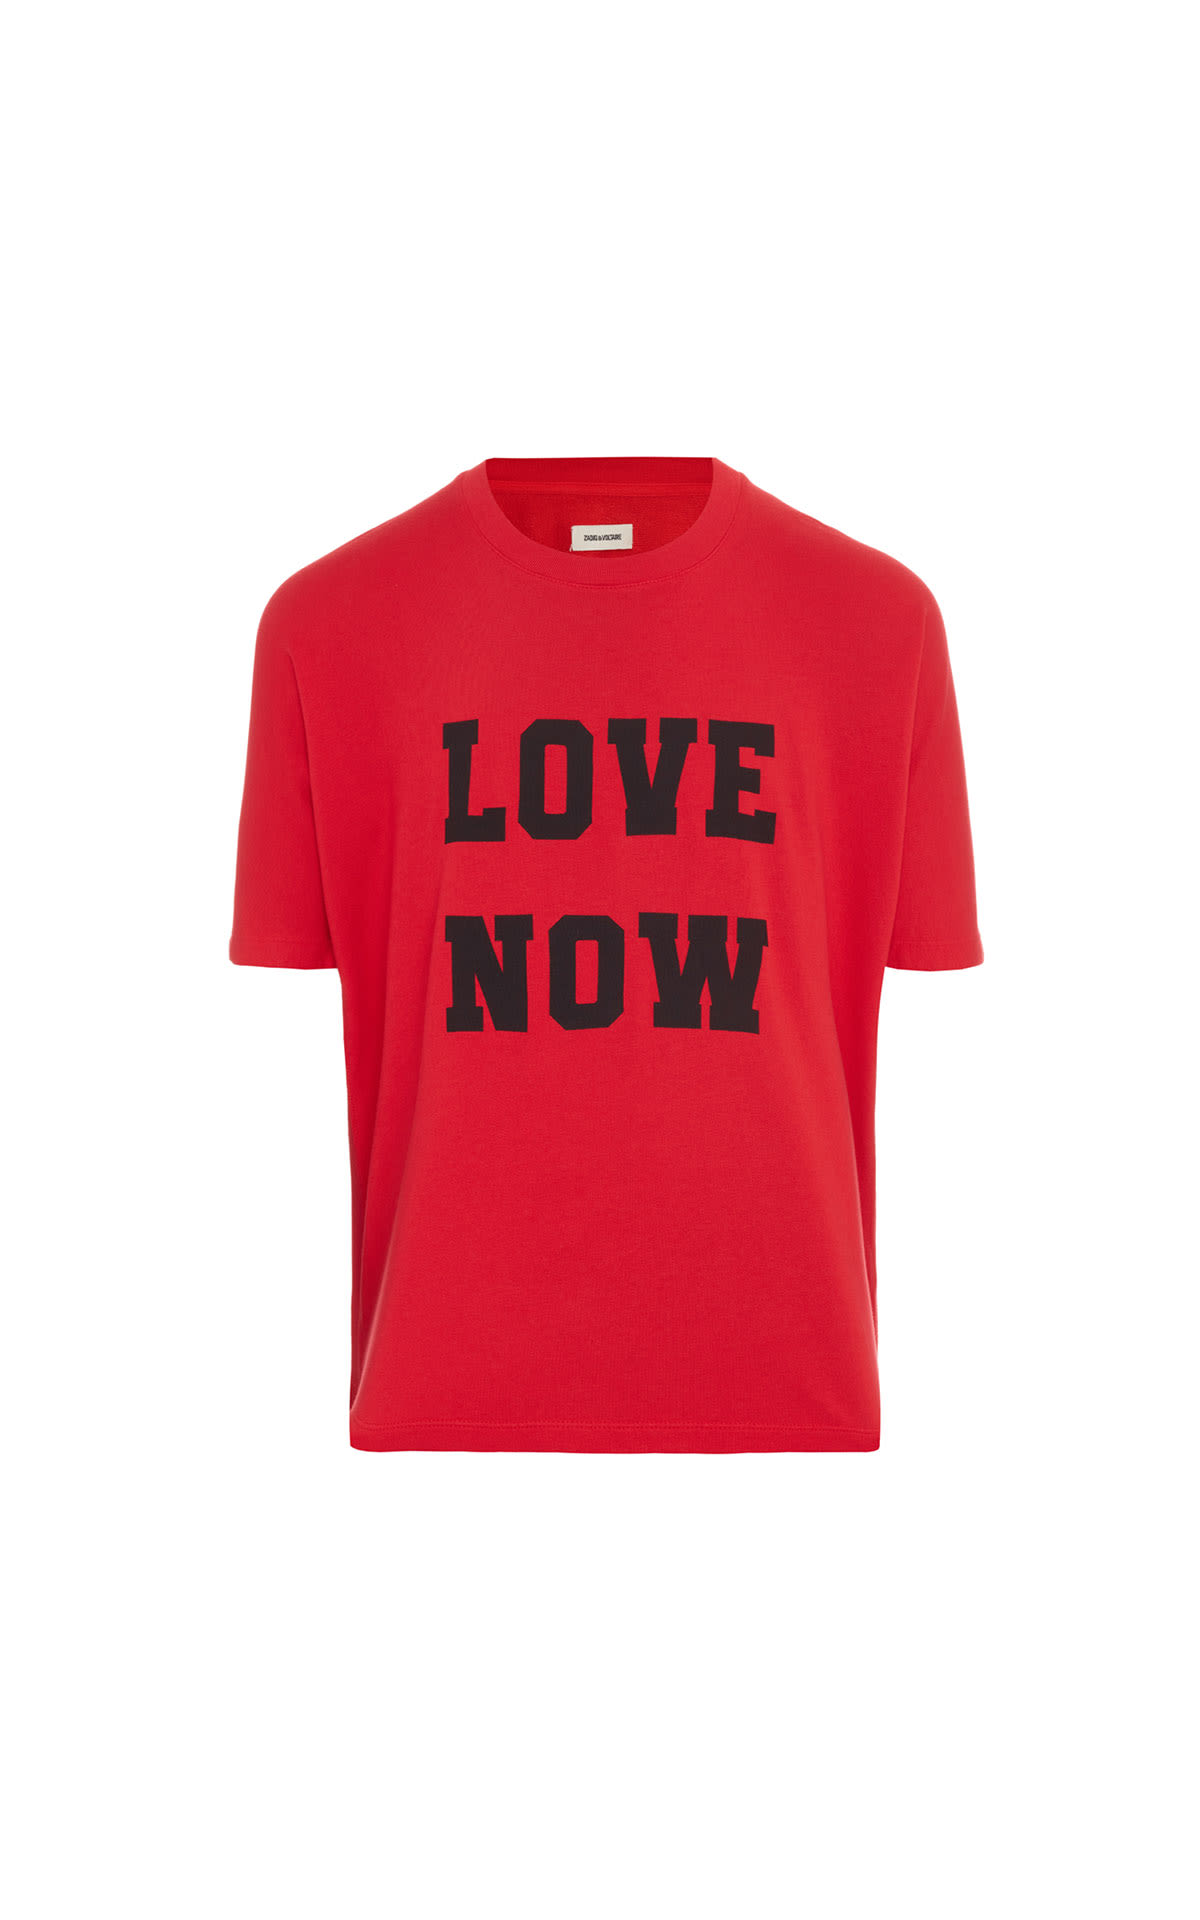 Zadig & Voltaire Portland love now sweater from Bicester Village